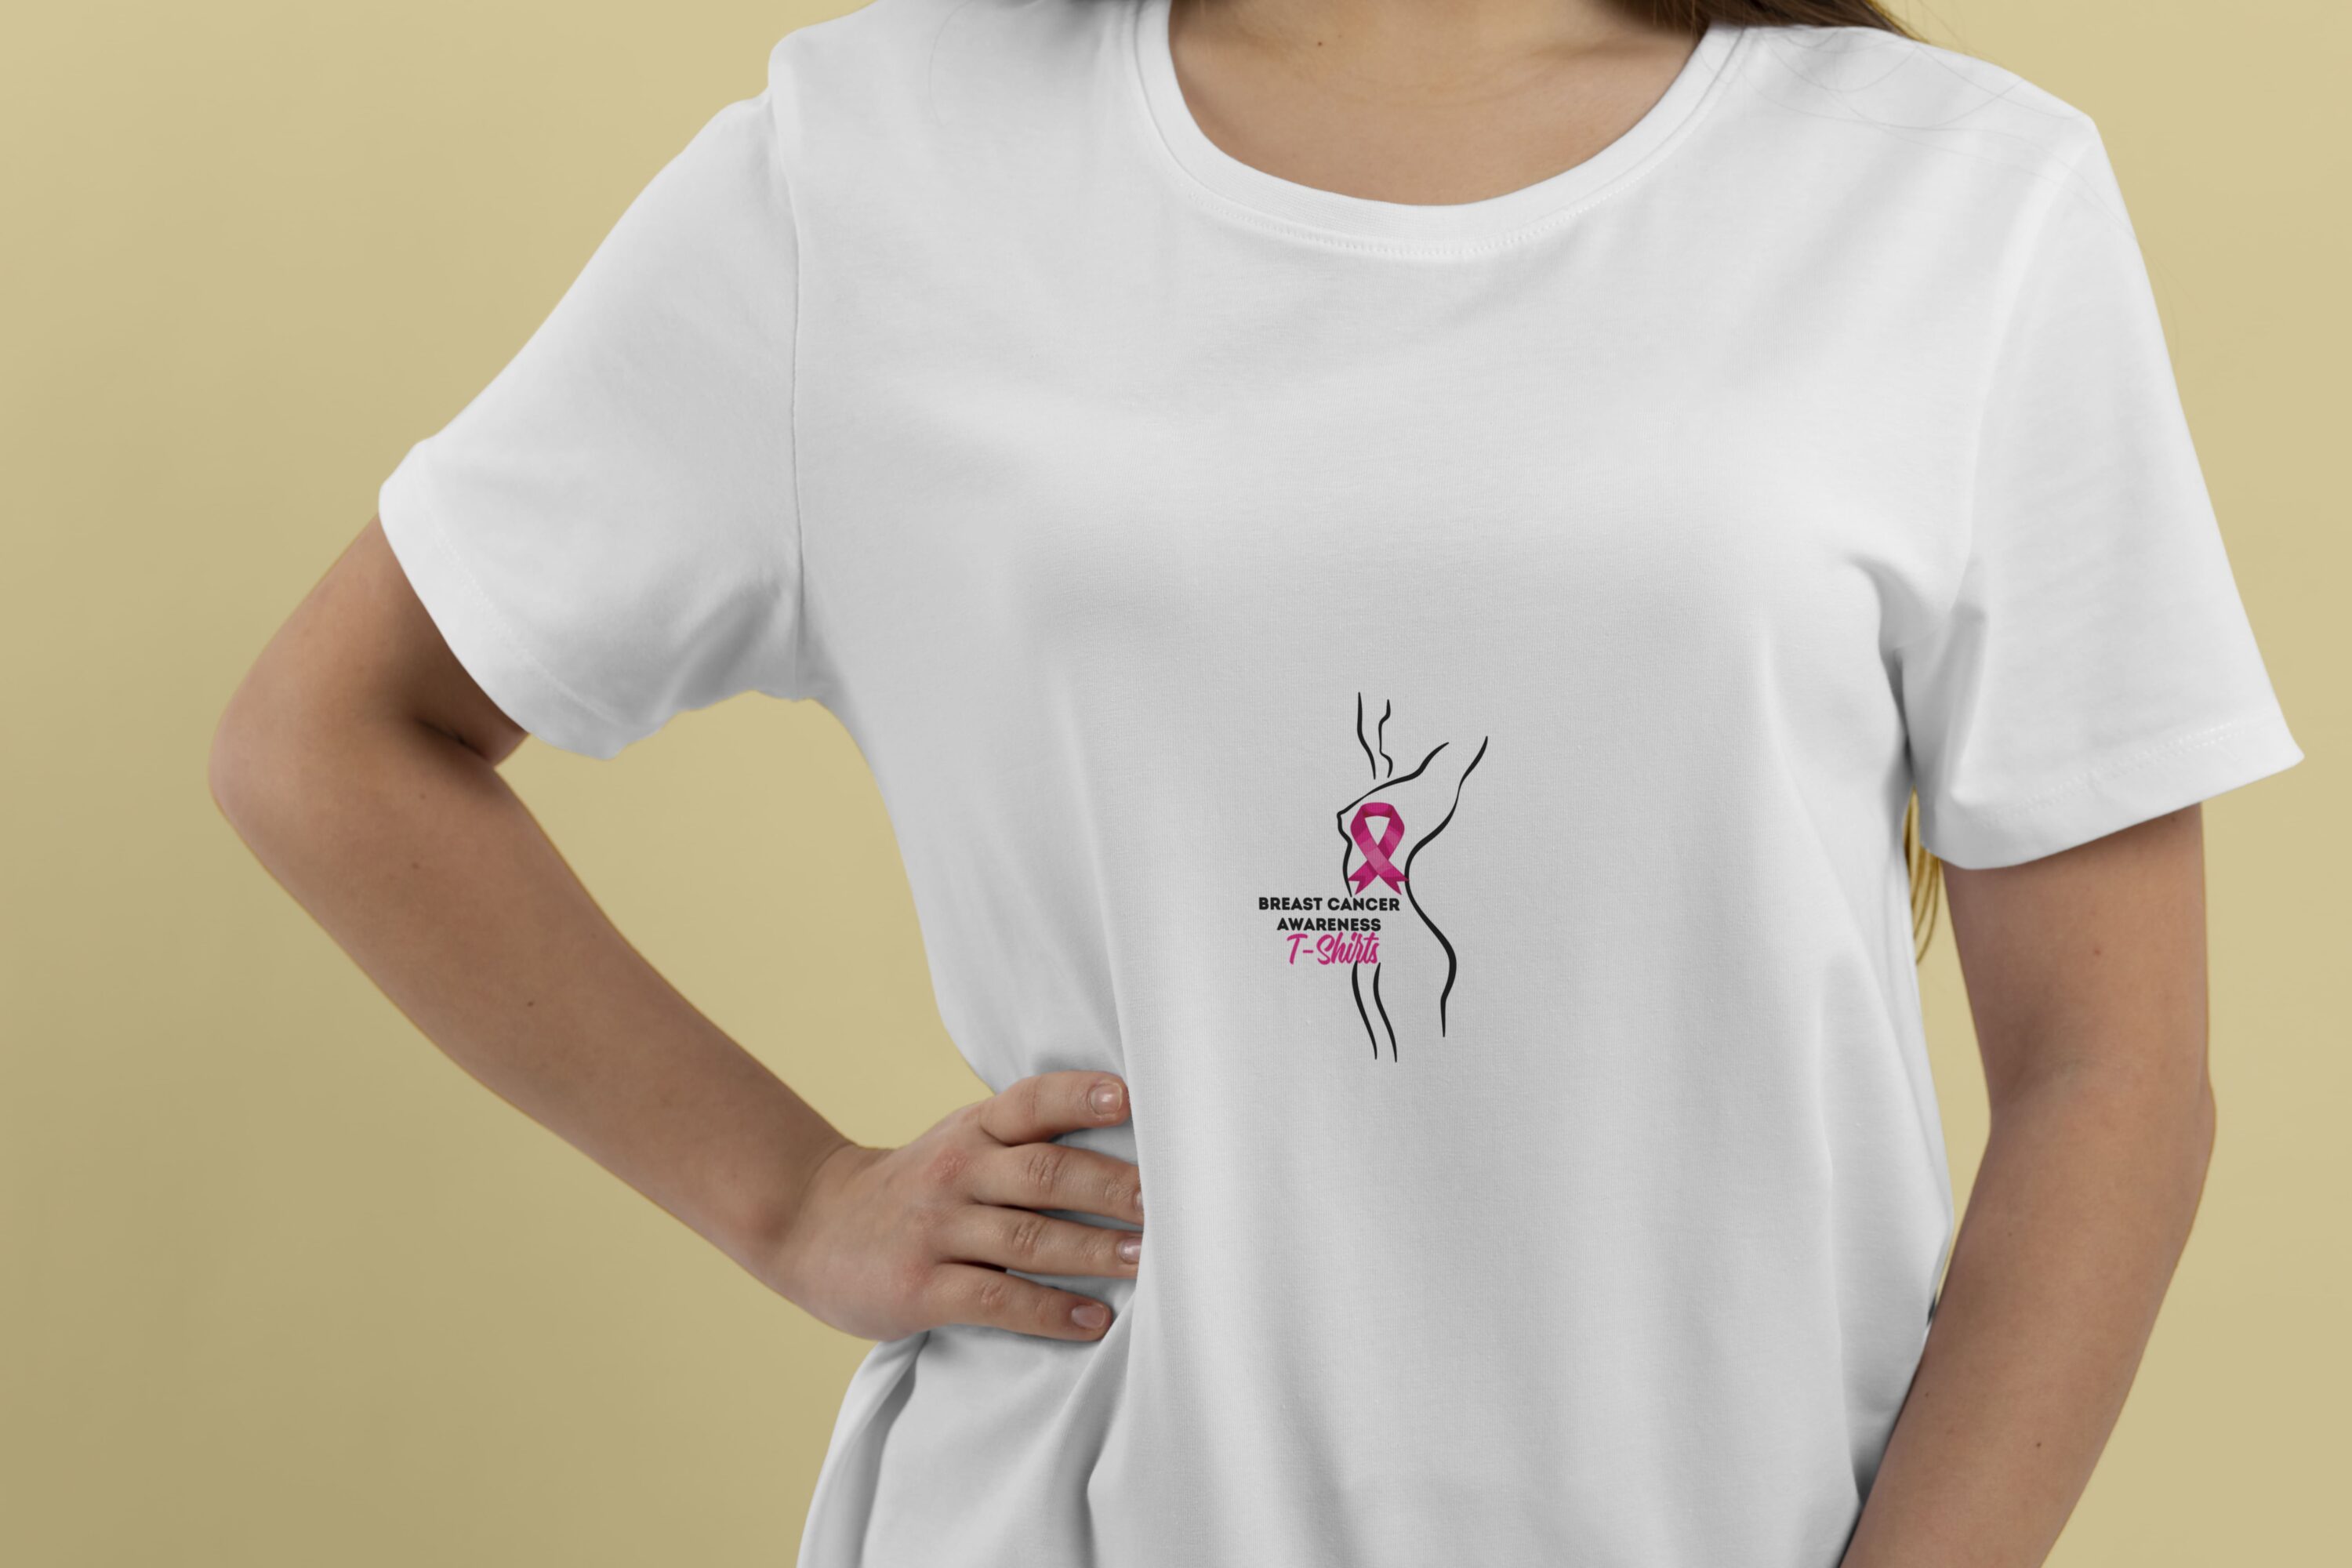 Delicate women body with the pink breast cancer ribbon.